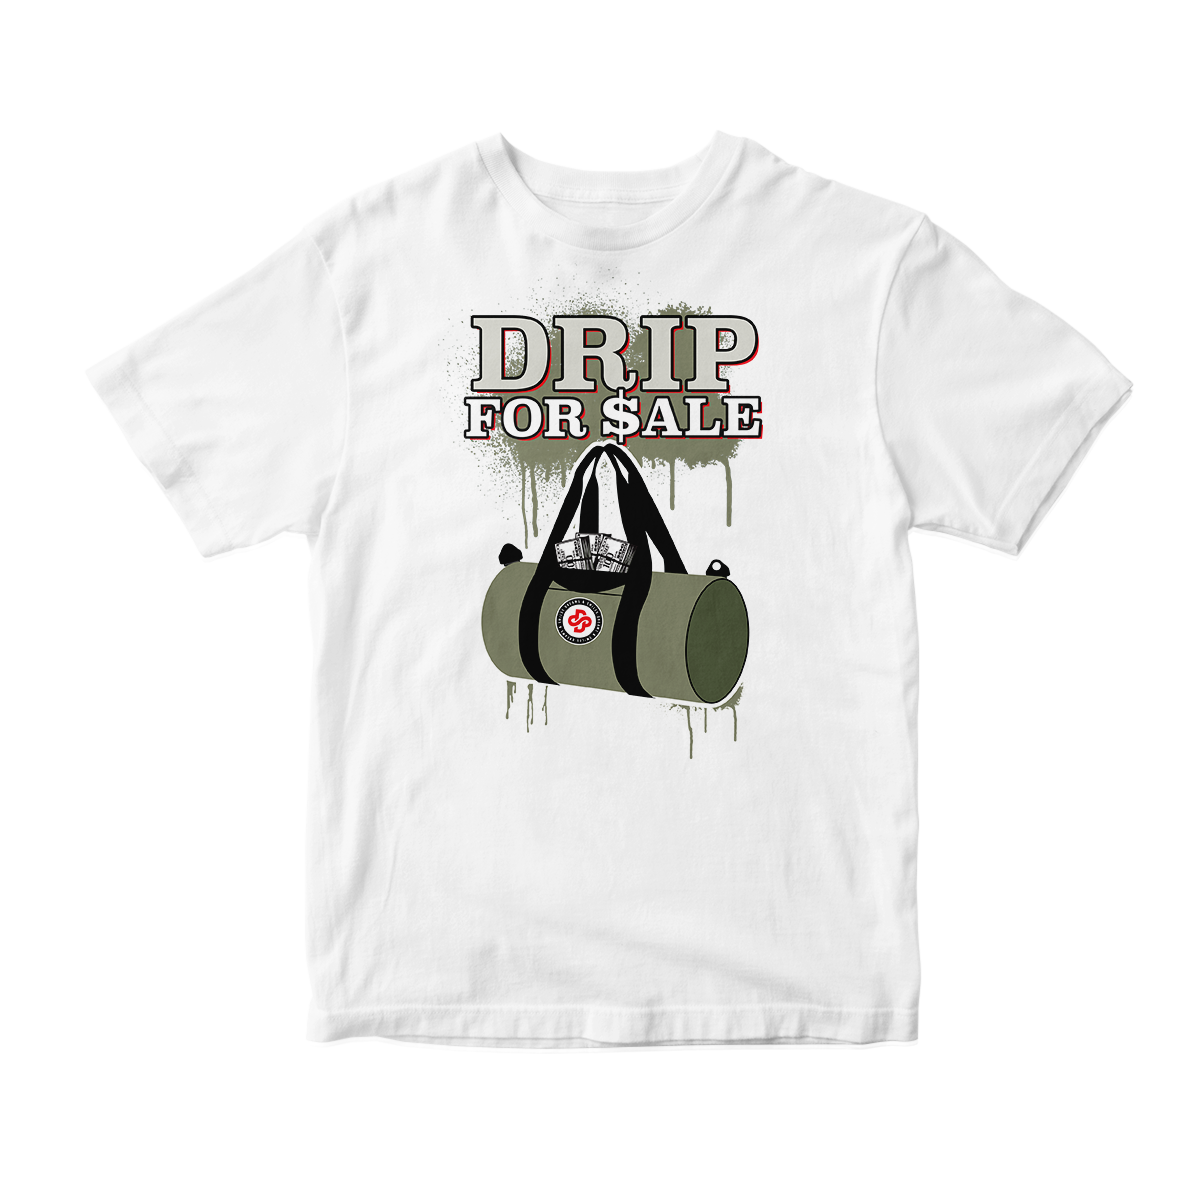 'Drip For Sale' in Medium Olive CW Short Sleeve Tee